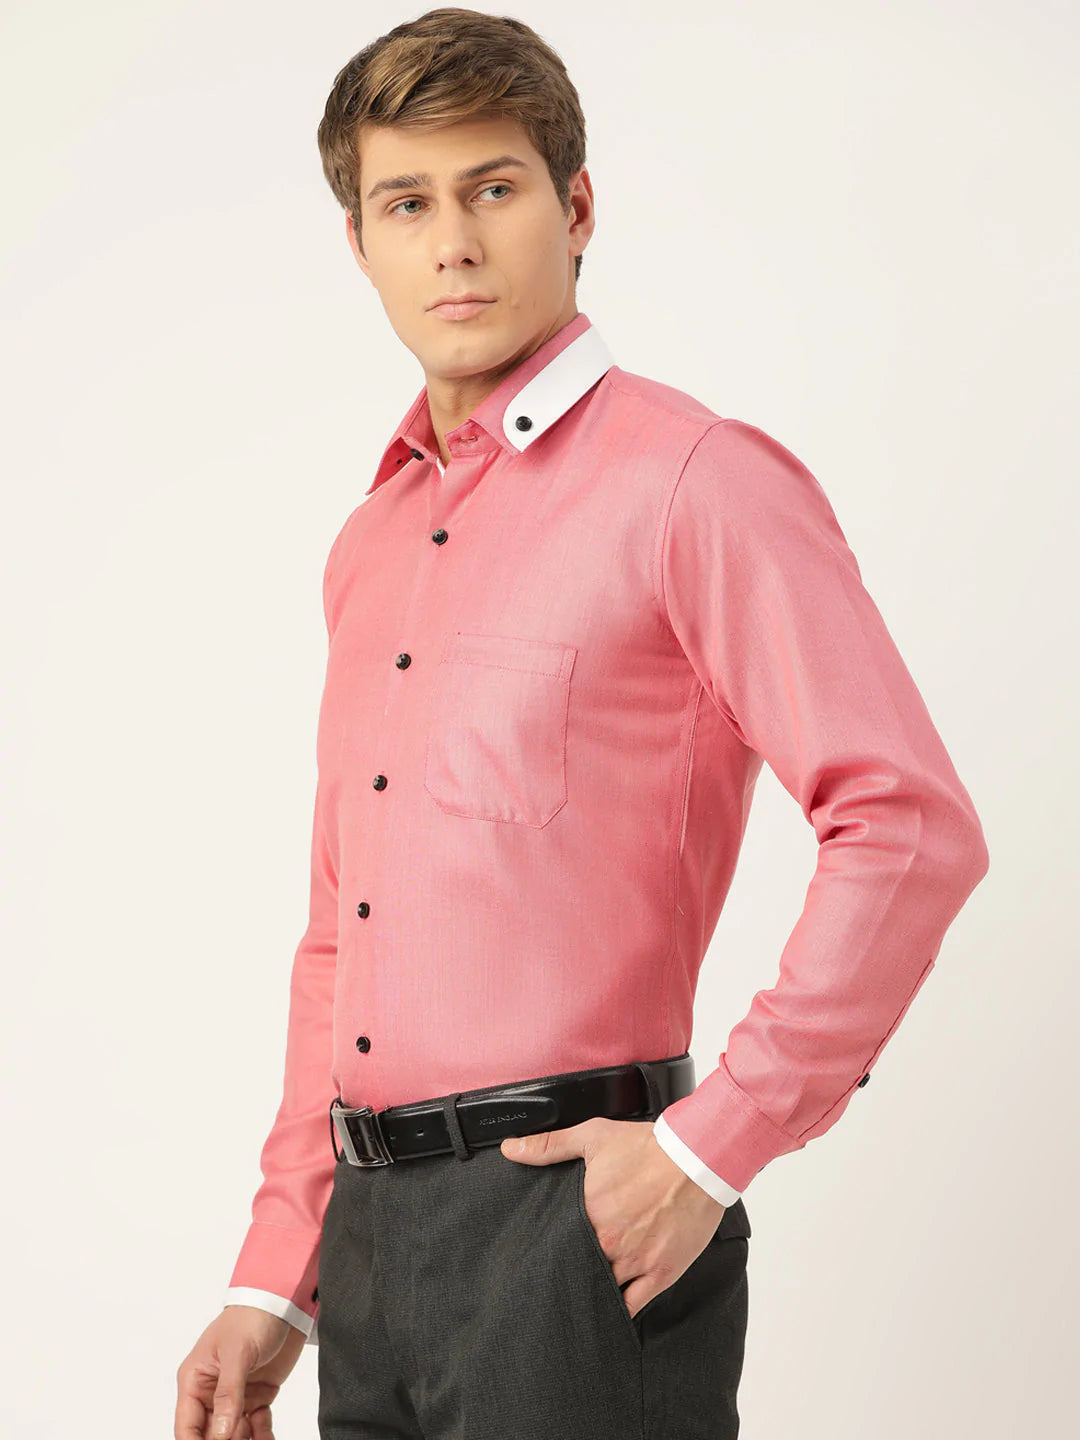 Jainish Men's  Cotton Solid Formal Shirts ( SF 796Red )